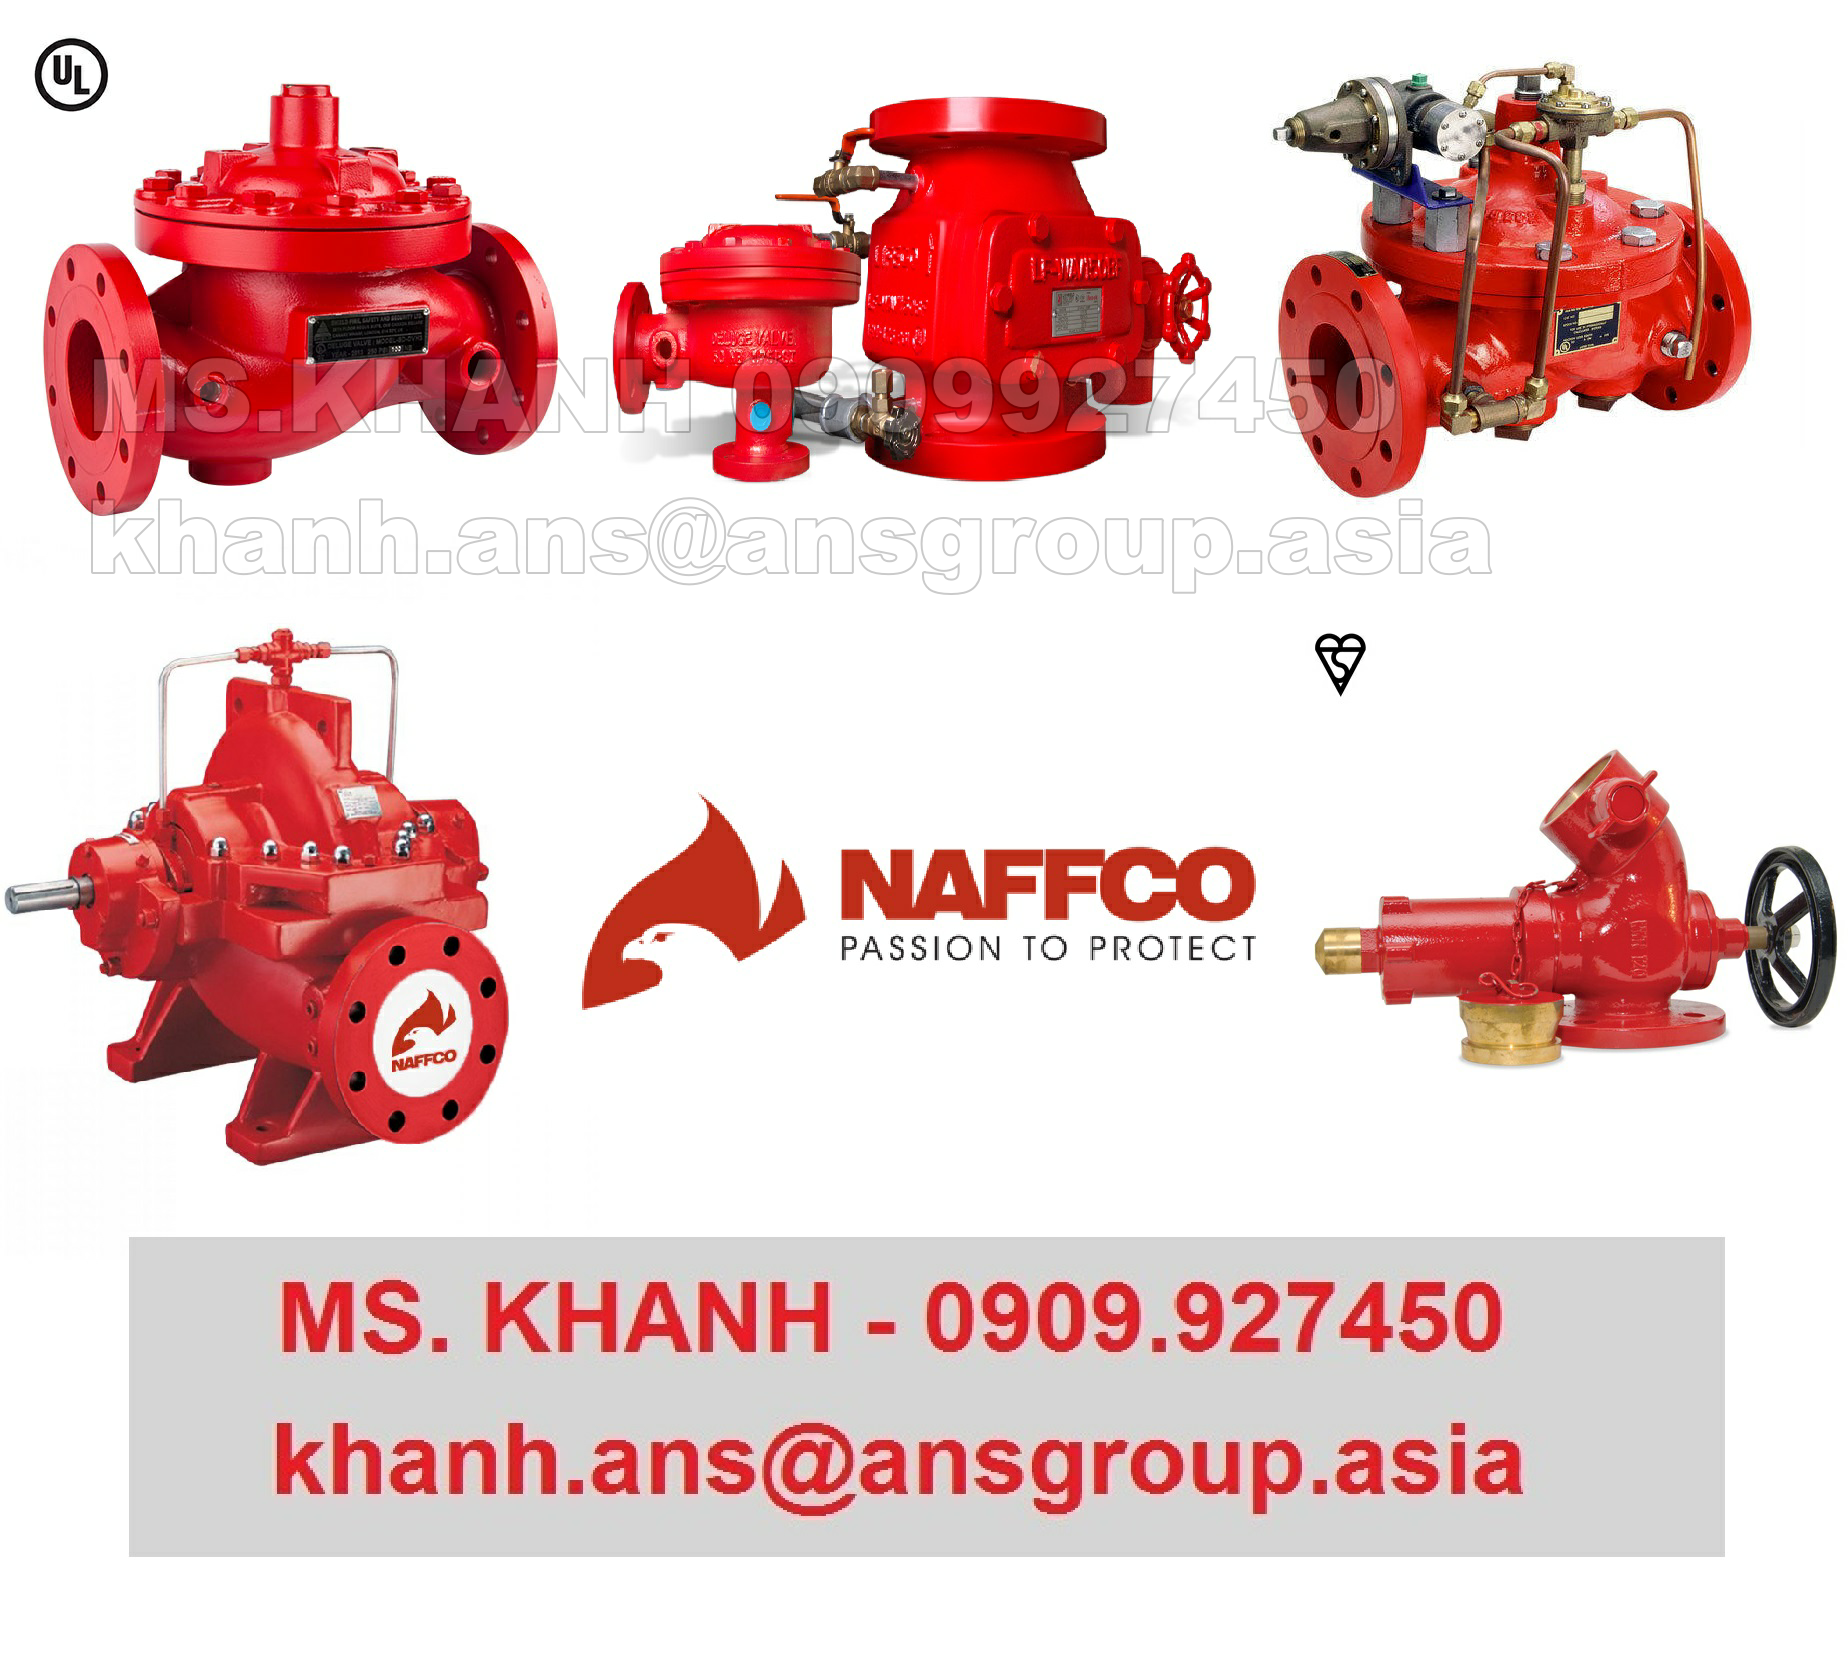 thiet-bi-roof-manifold-inlet-4-x-2-2-1-2-outlet-naffco-vietnam.png